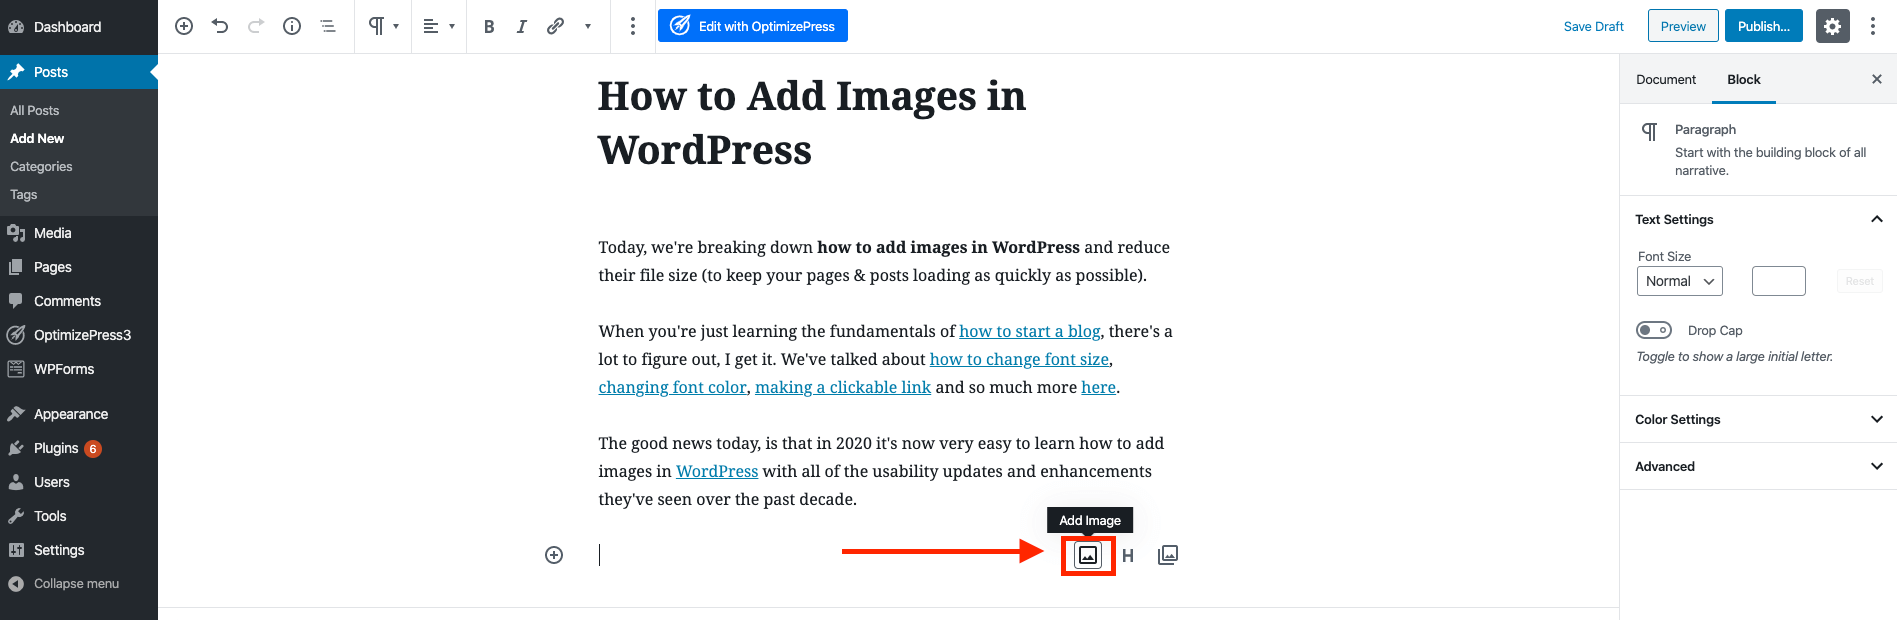 How to Add Images in Gutenberg WordPress Editor